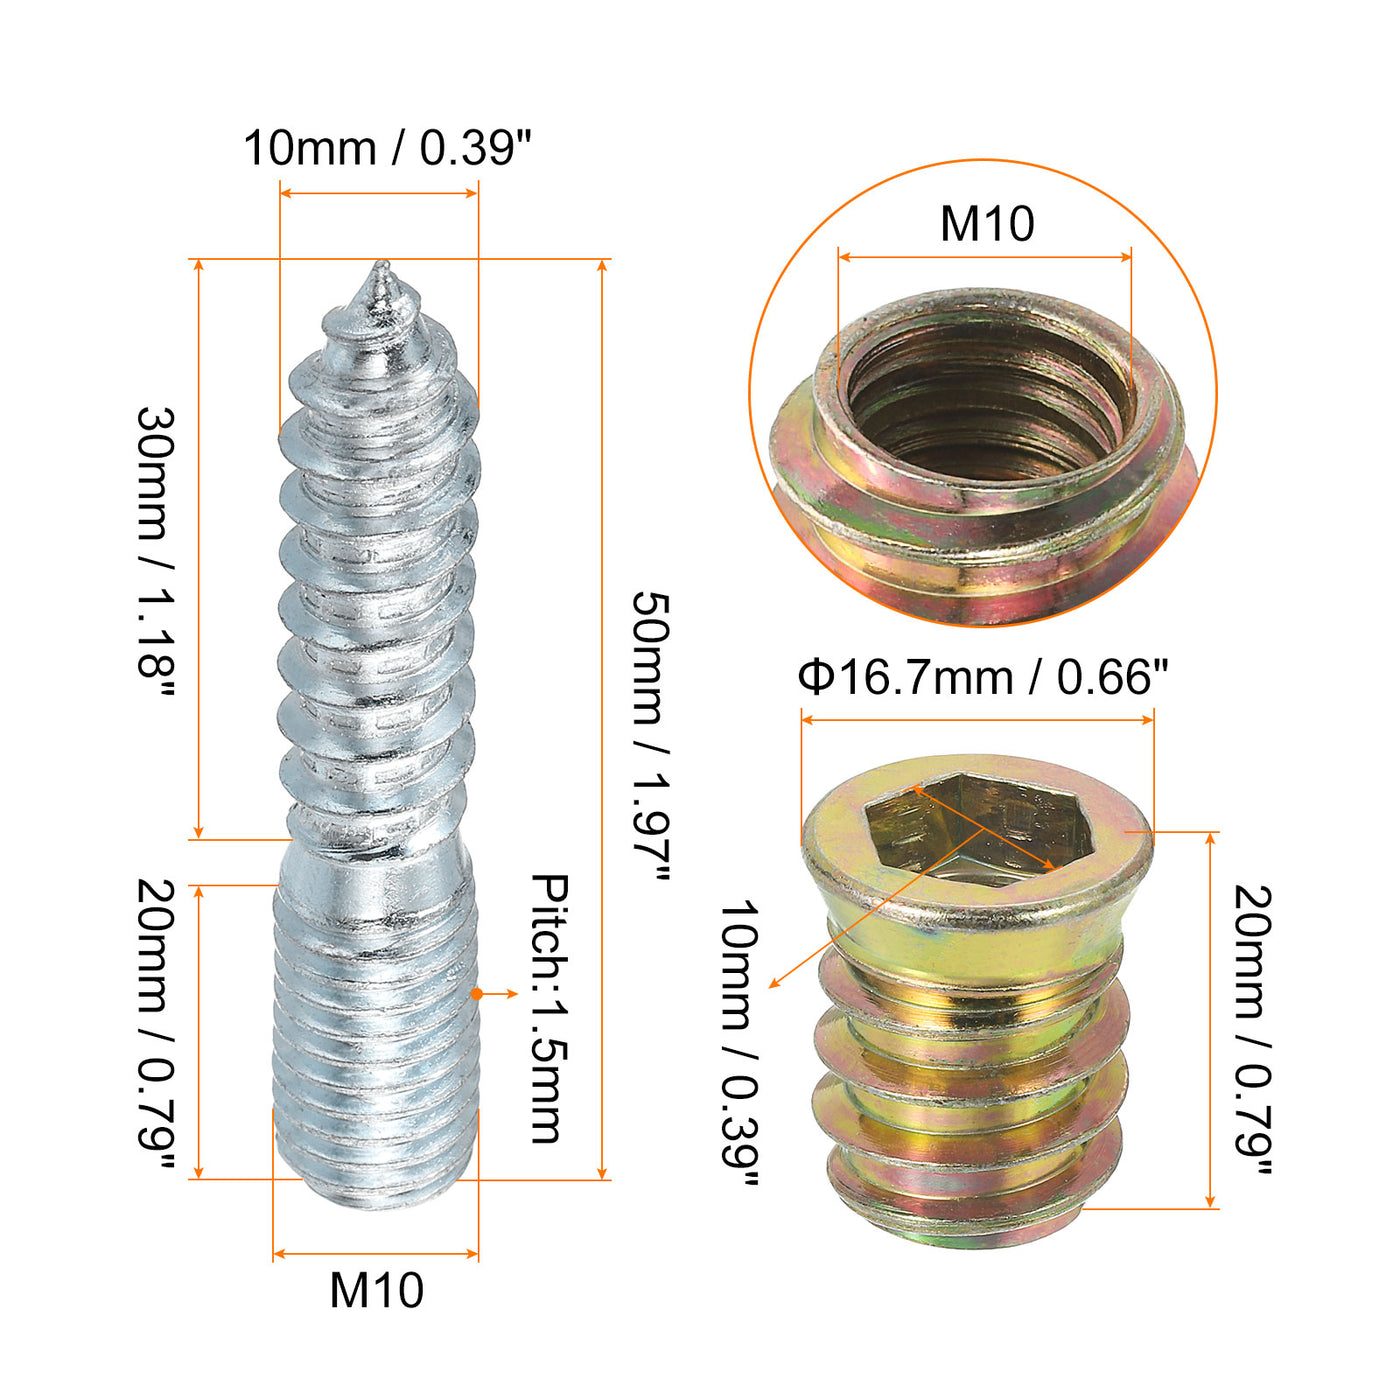 uxcell Uxcell 8pcs M10x50mm Hanger Bolts with 8pcs M10x20mm Threaded Insert Nuts Interface